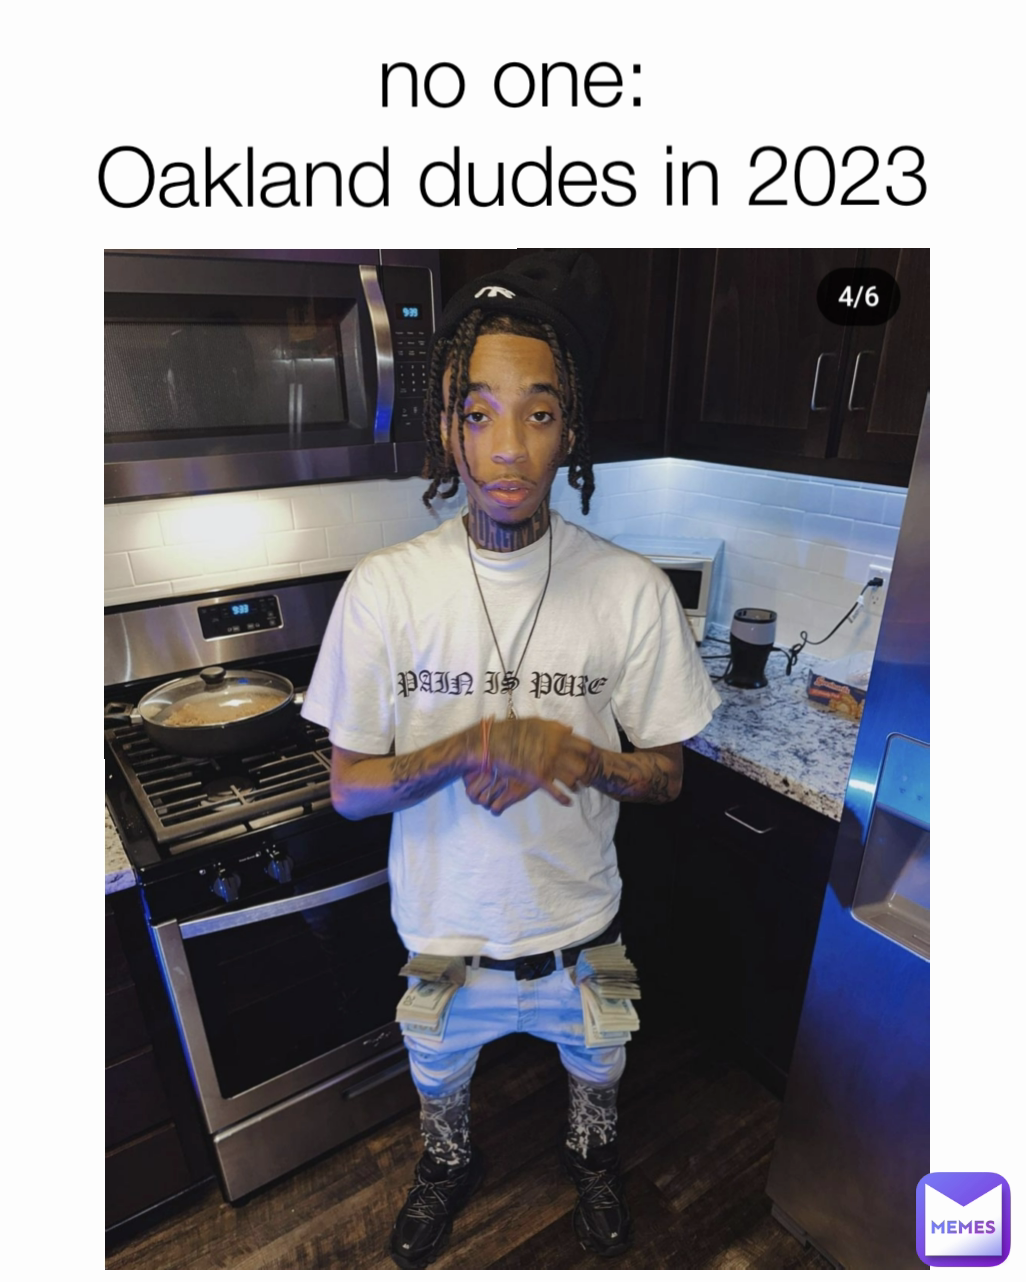 no one:
Oakland dudes in 2023